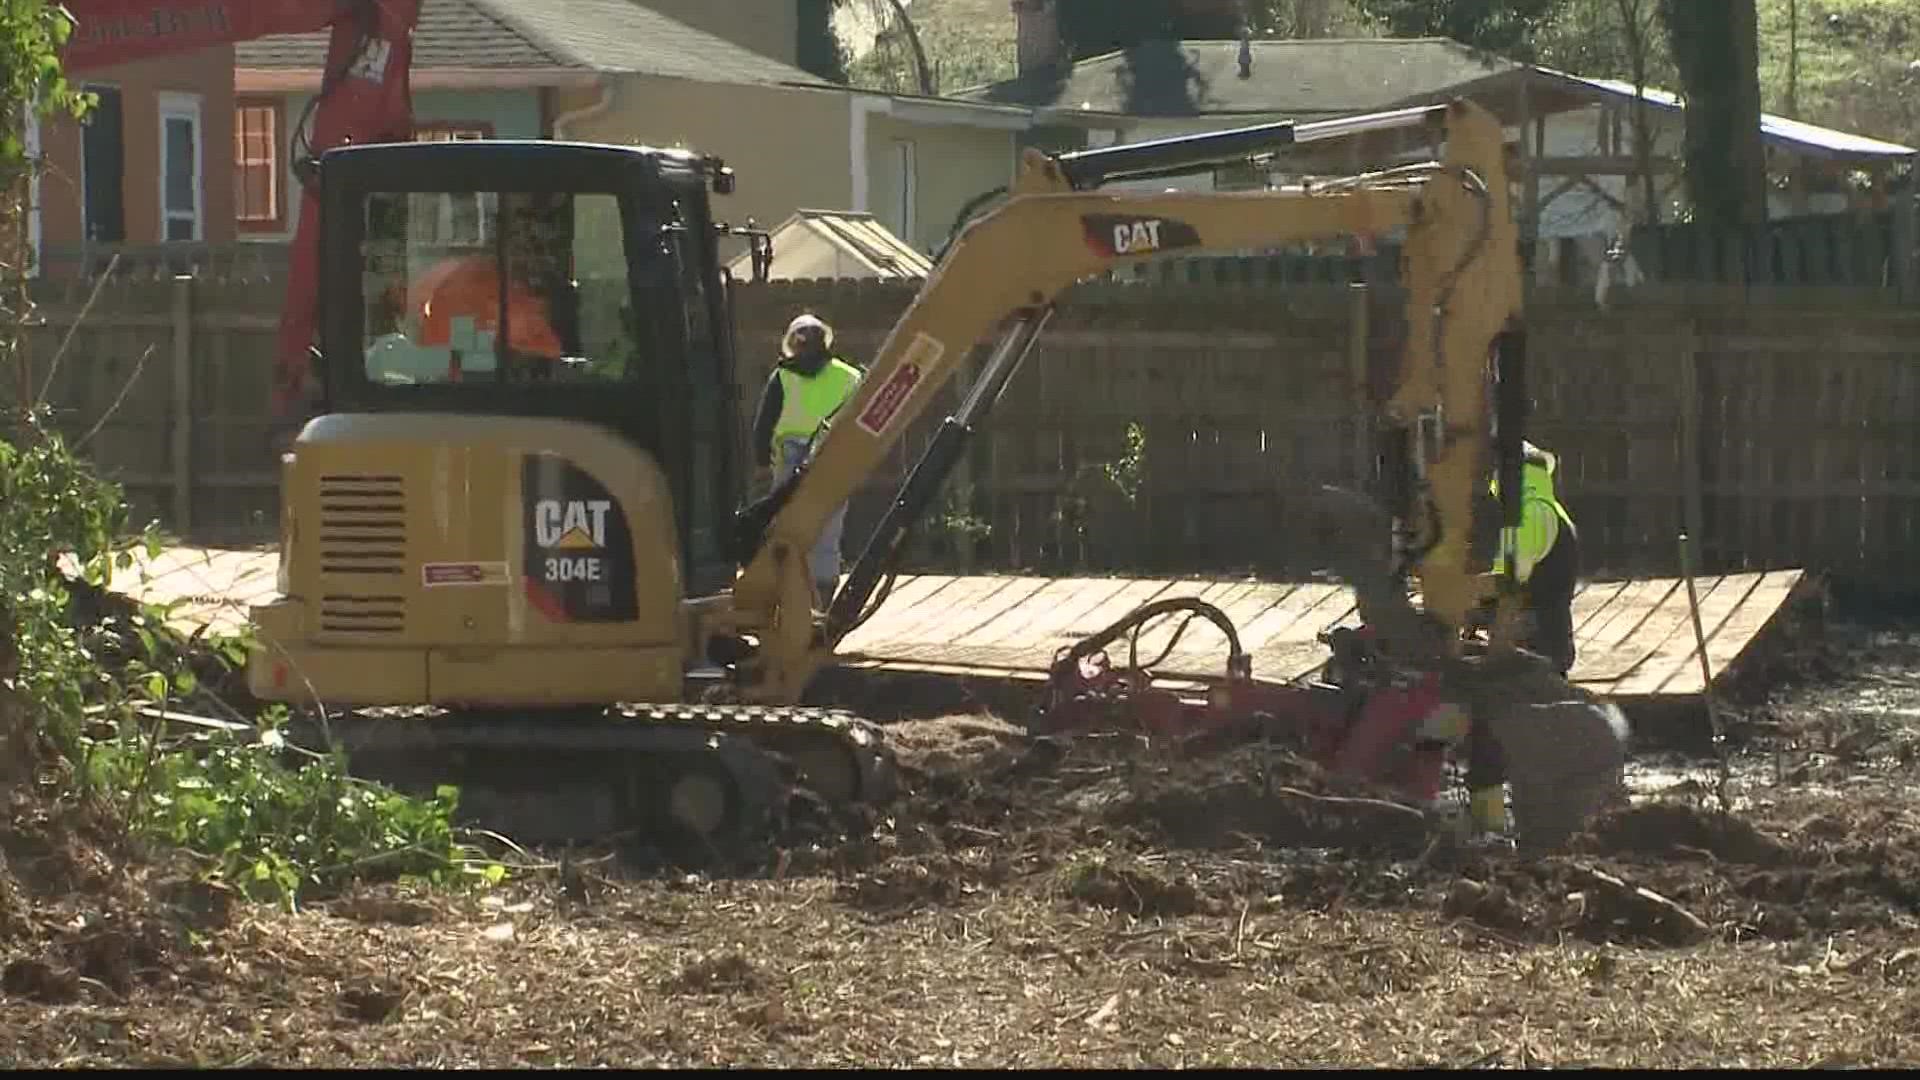 Lead was discovered in the soil of these Atlanta properties.